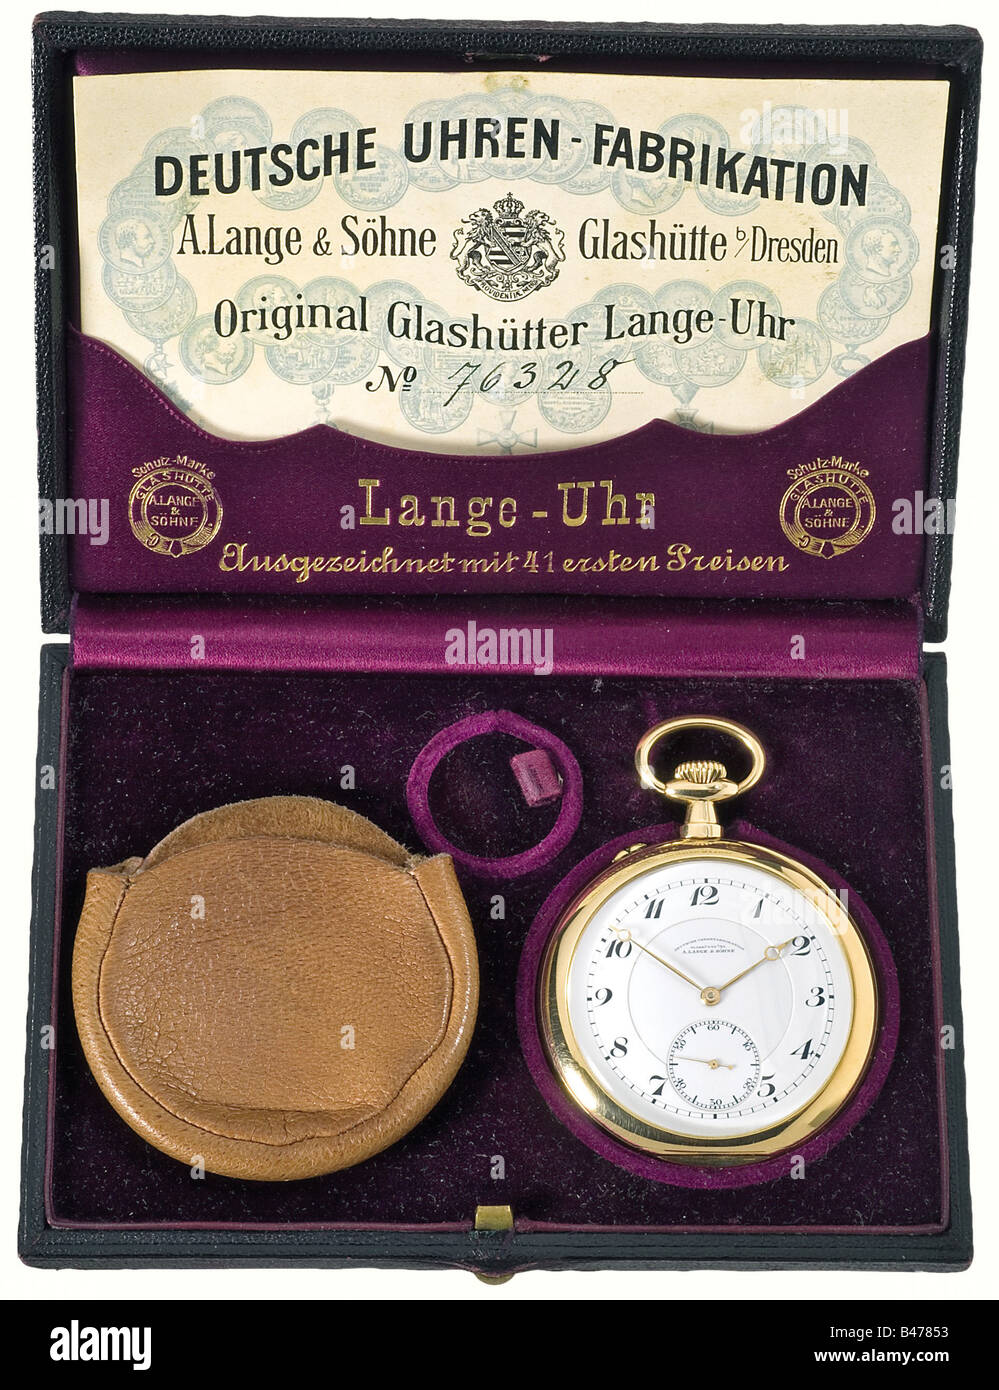 A gold savonette, 'Deutsche Uhrenfabrikation A. Lange & Söhne, Glashütte in Sachsen' (German Watch Manufacture A. Lange & Söhne, Glashütte in Saxony) circa 1914. 14 carat. Smooth case, white enameled dial, and precision movement no. 76328. Housing and dial inscribed as above. There is a gooseneck fine adjustment, and gold escapement lever and gold escapement wheel. Diameter 53 mm. In a gold stamped, leather case with replacement glass and spring. There is also a golden watch chain with a snap catch, ring, uncut seal and cameo. historic, historical, 1910s, 20th , Stock Photo